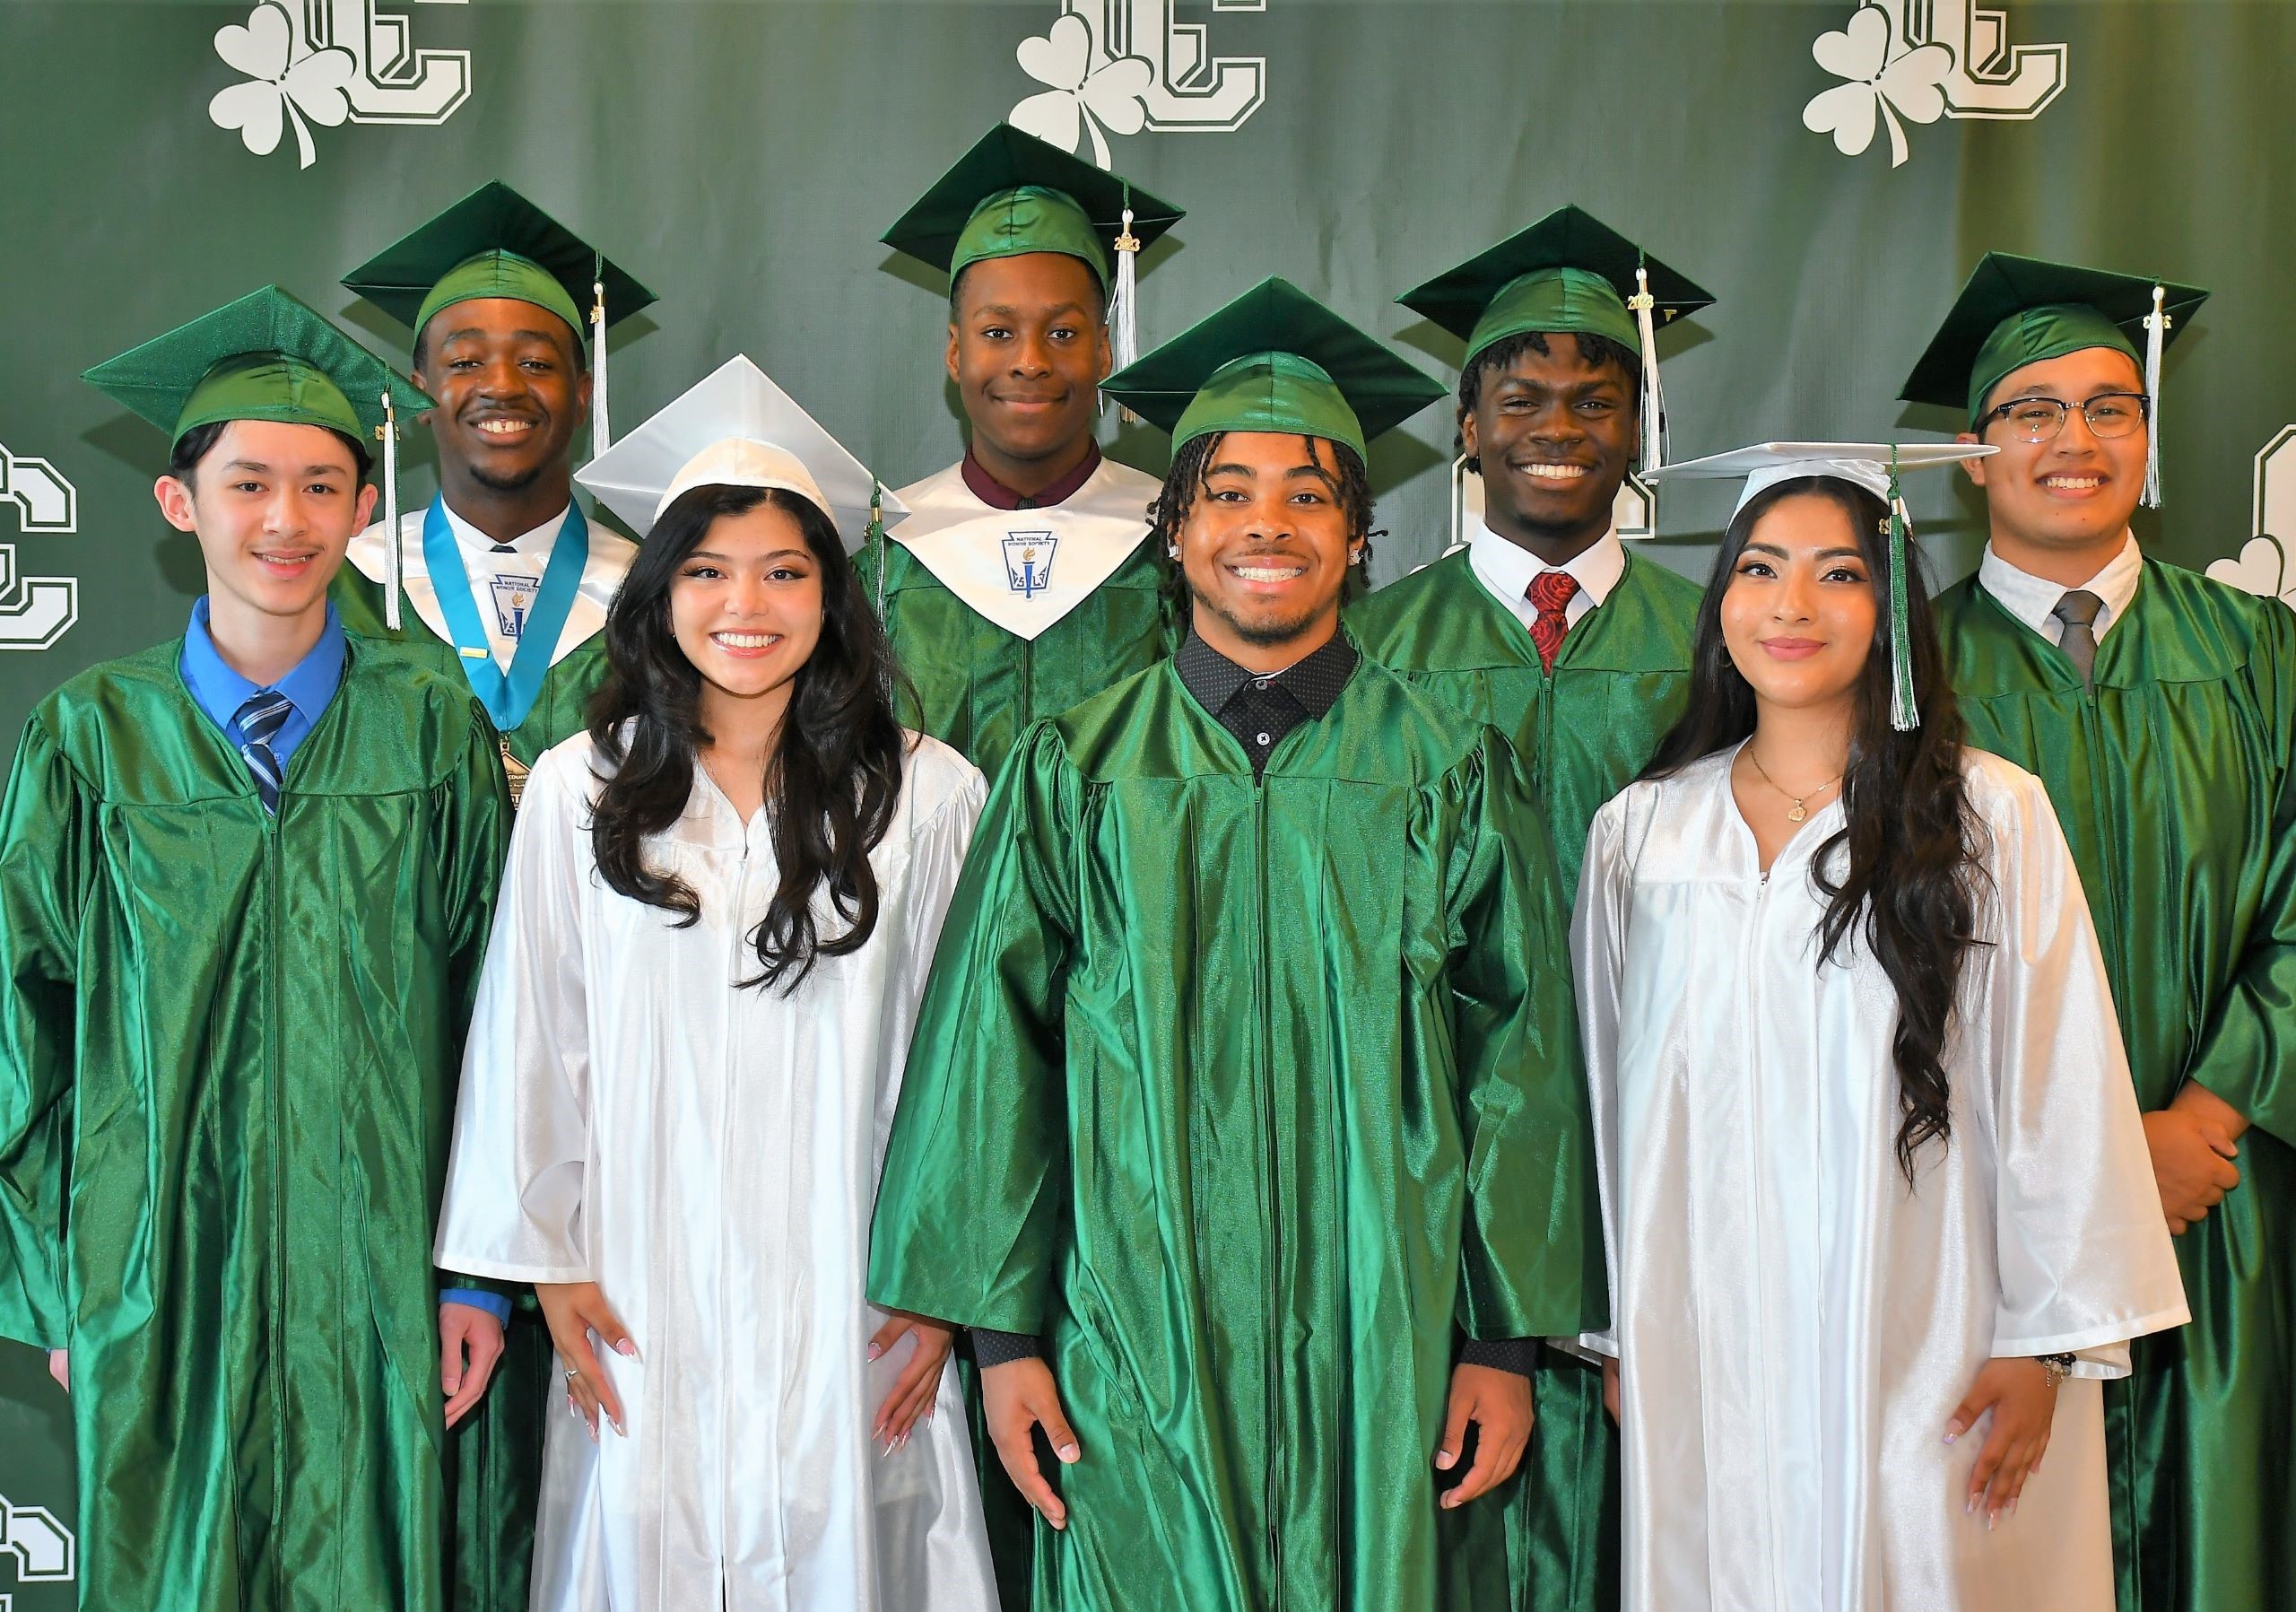 Girls in white and boys in green caps and gowns